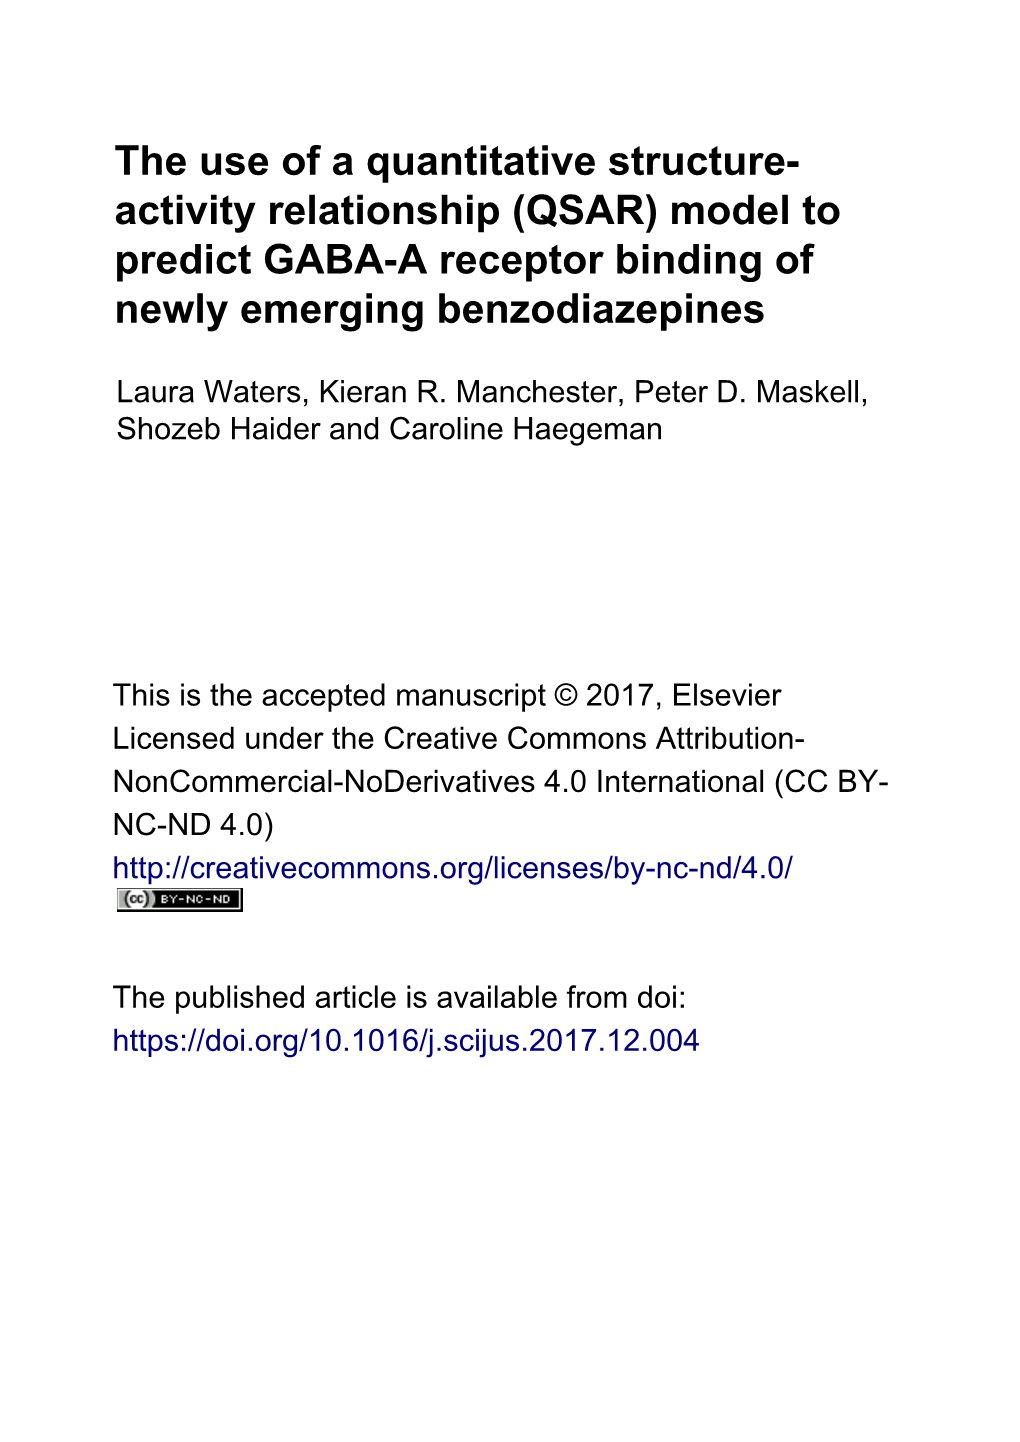 The Use of a Quantitative Structure- Activity Relationship (QSAR) Model to Predict GABA-A Receptor Binding of Newly Emerging Benzodiazepines